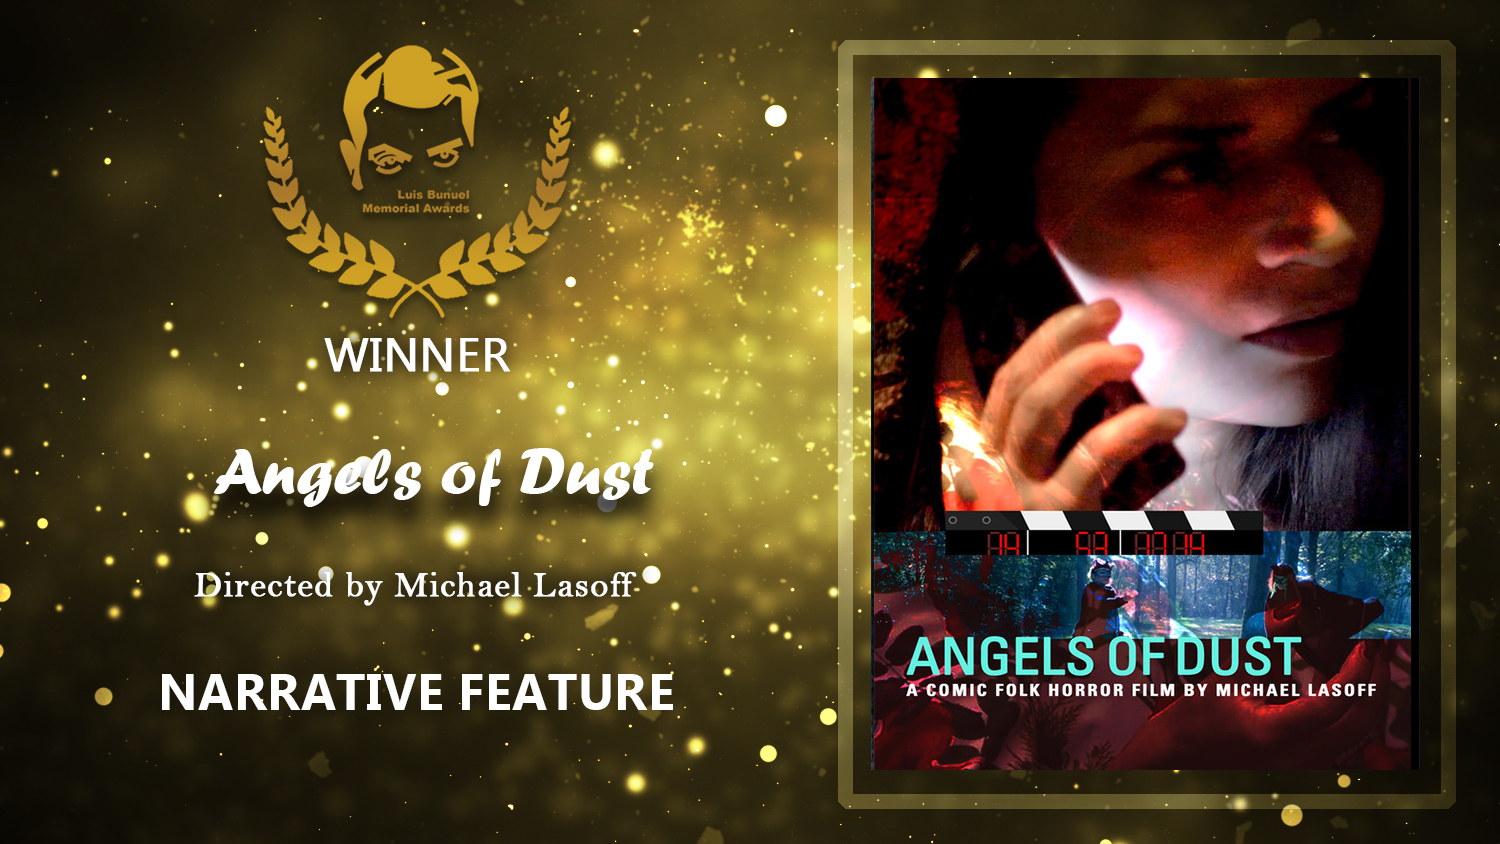 Angels of Dust Narrative feature